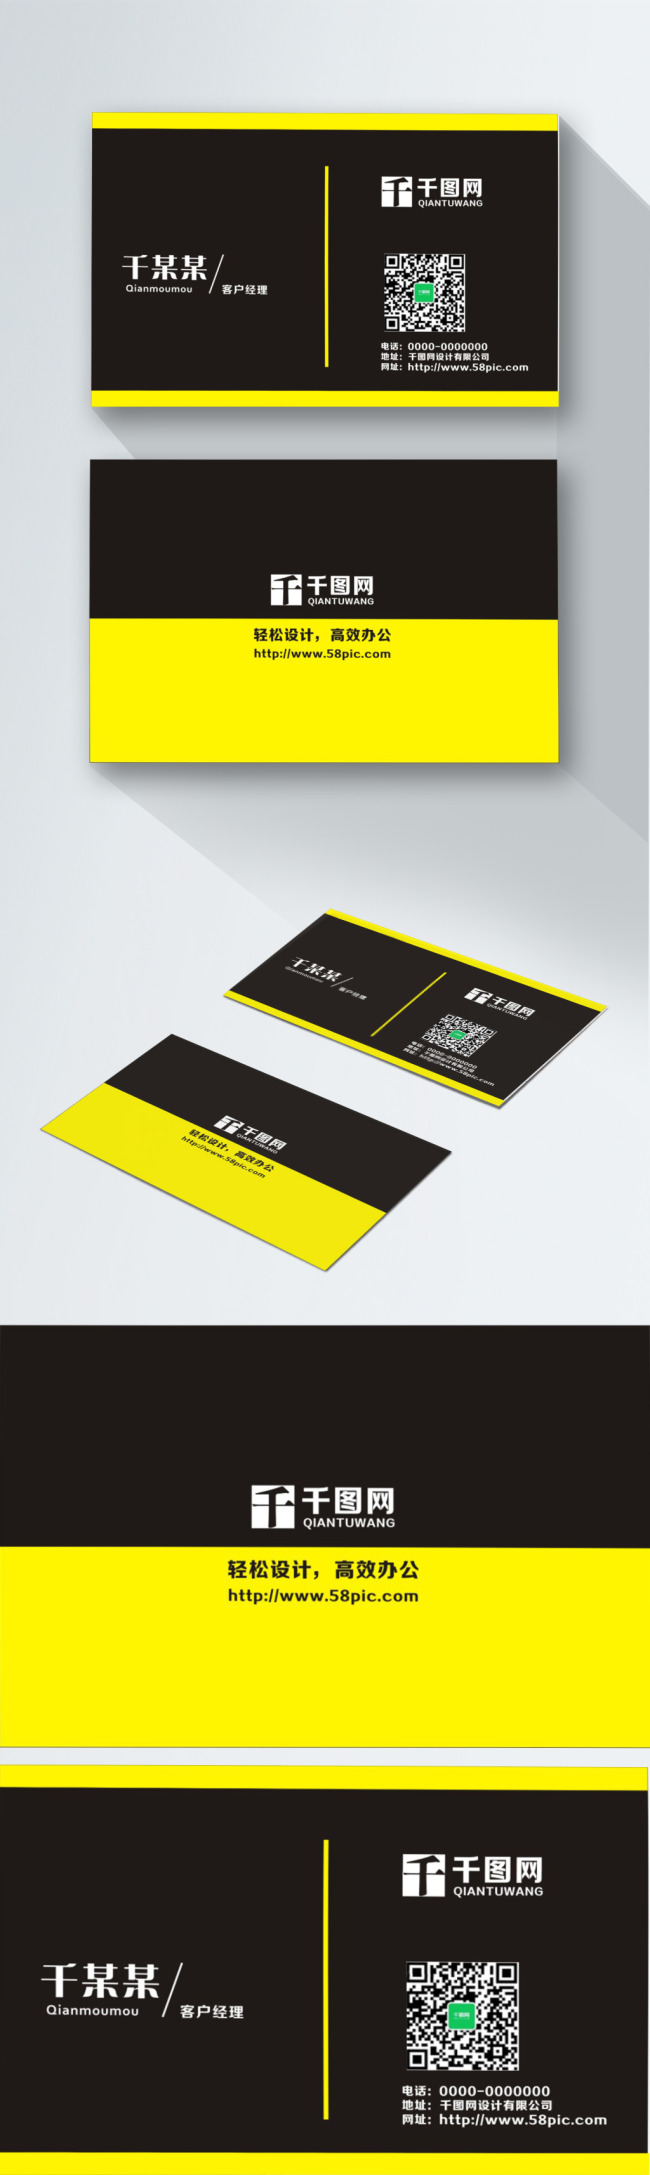 Download Simple Black And Yellow Business Card Template Image Picture Free Download 727878307 Lovepik Com PSD Mockup Templates